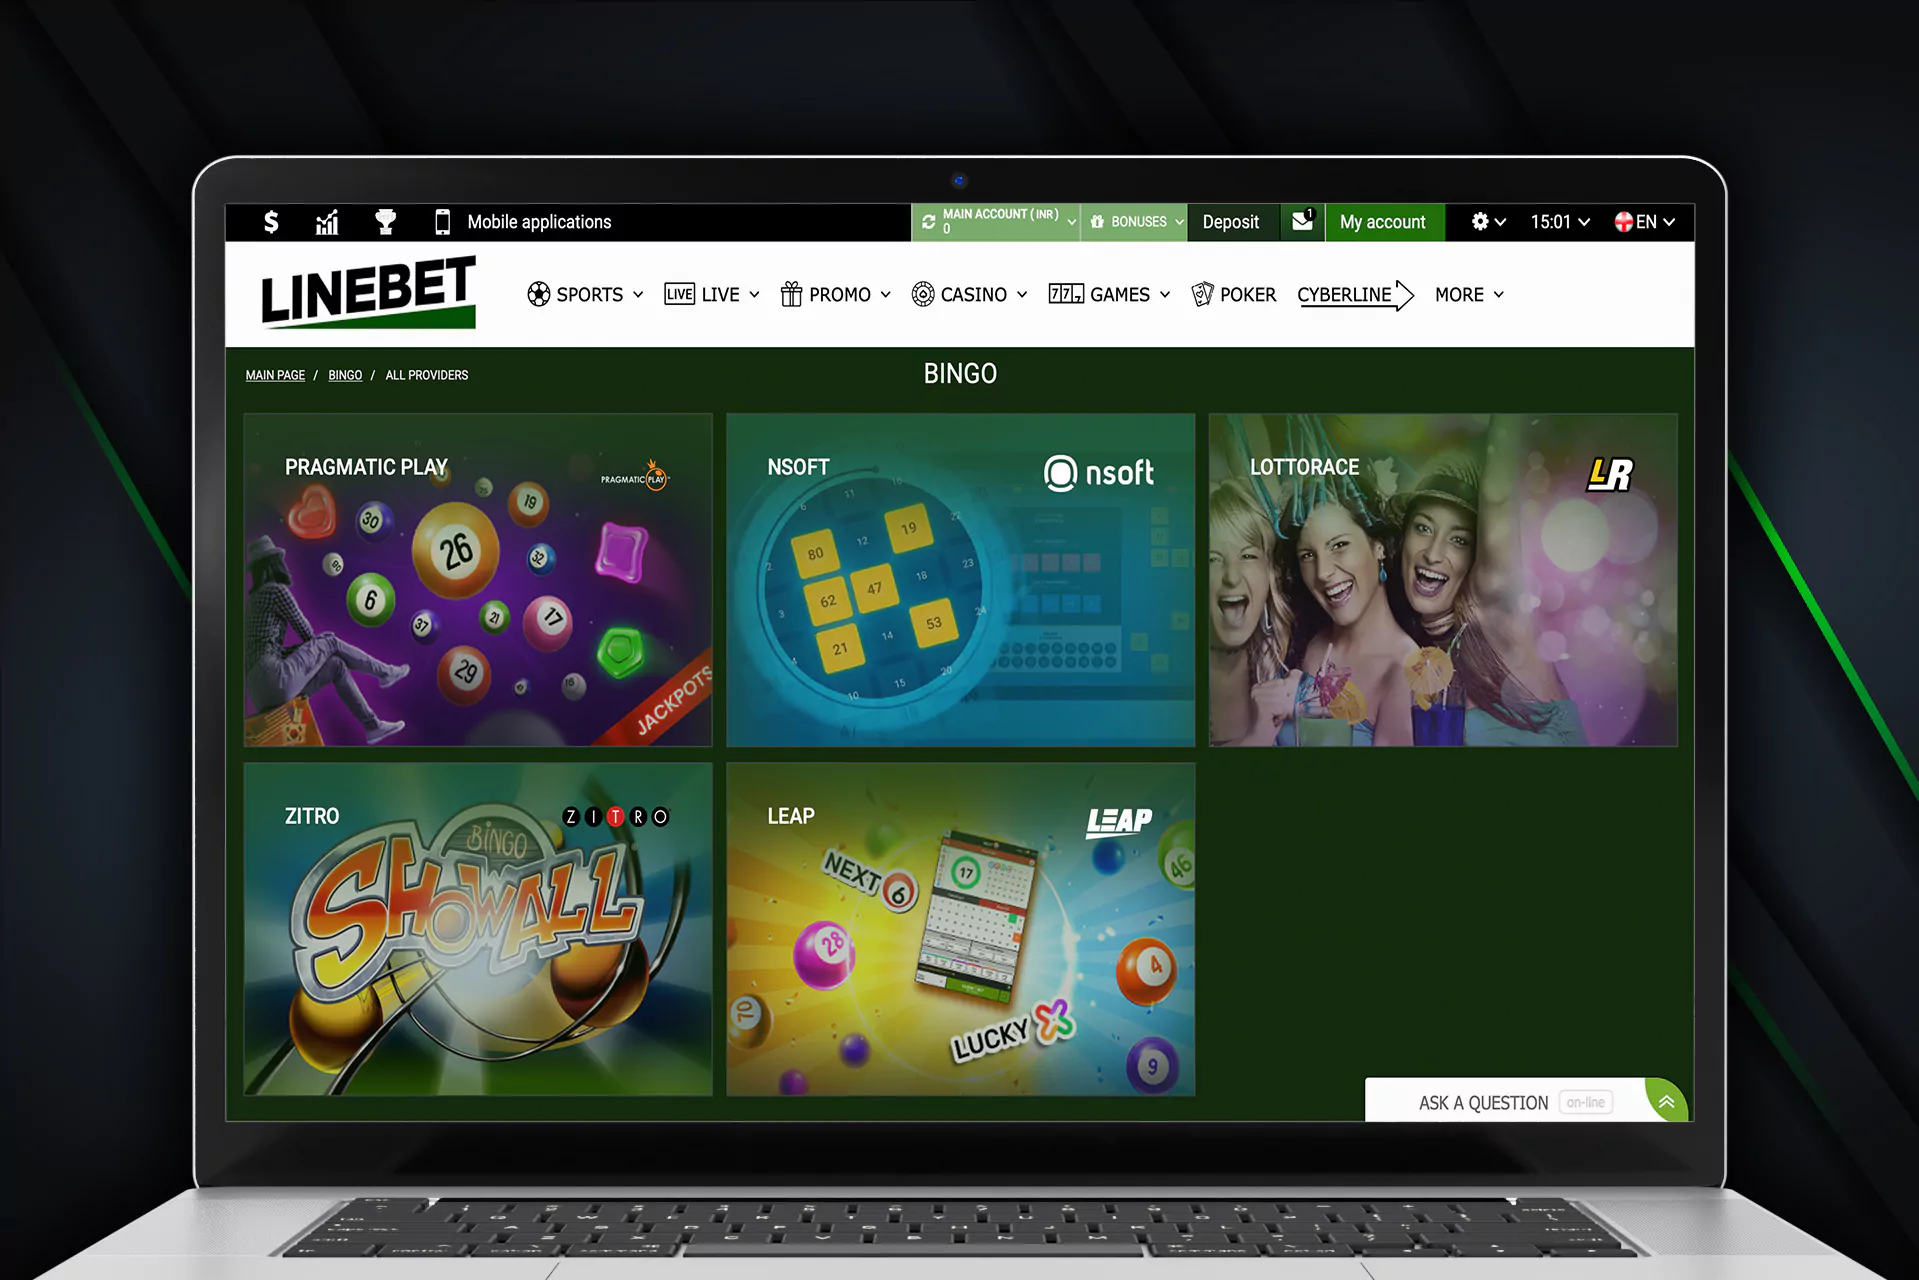 Test your luck and play bingo games in the Linebet casino.